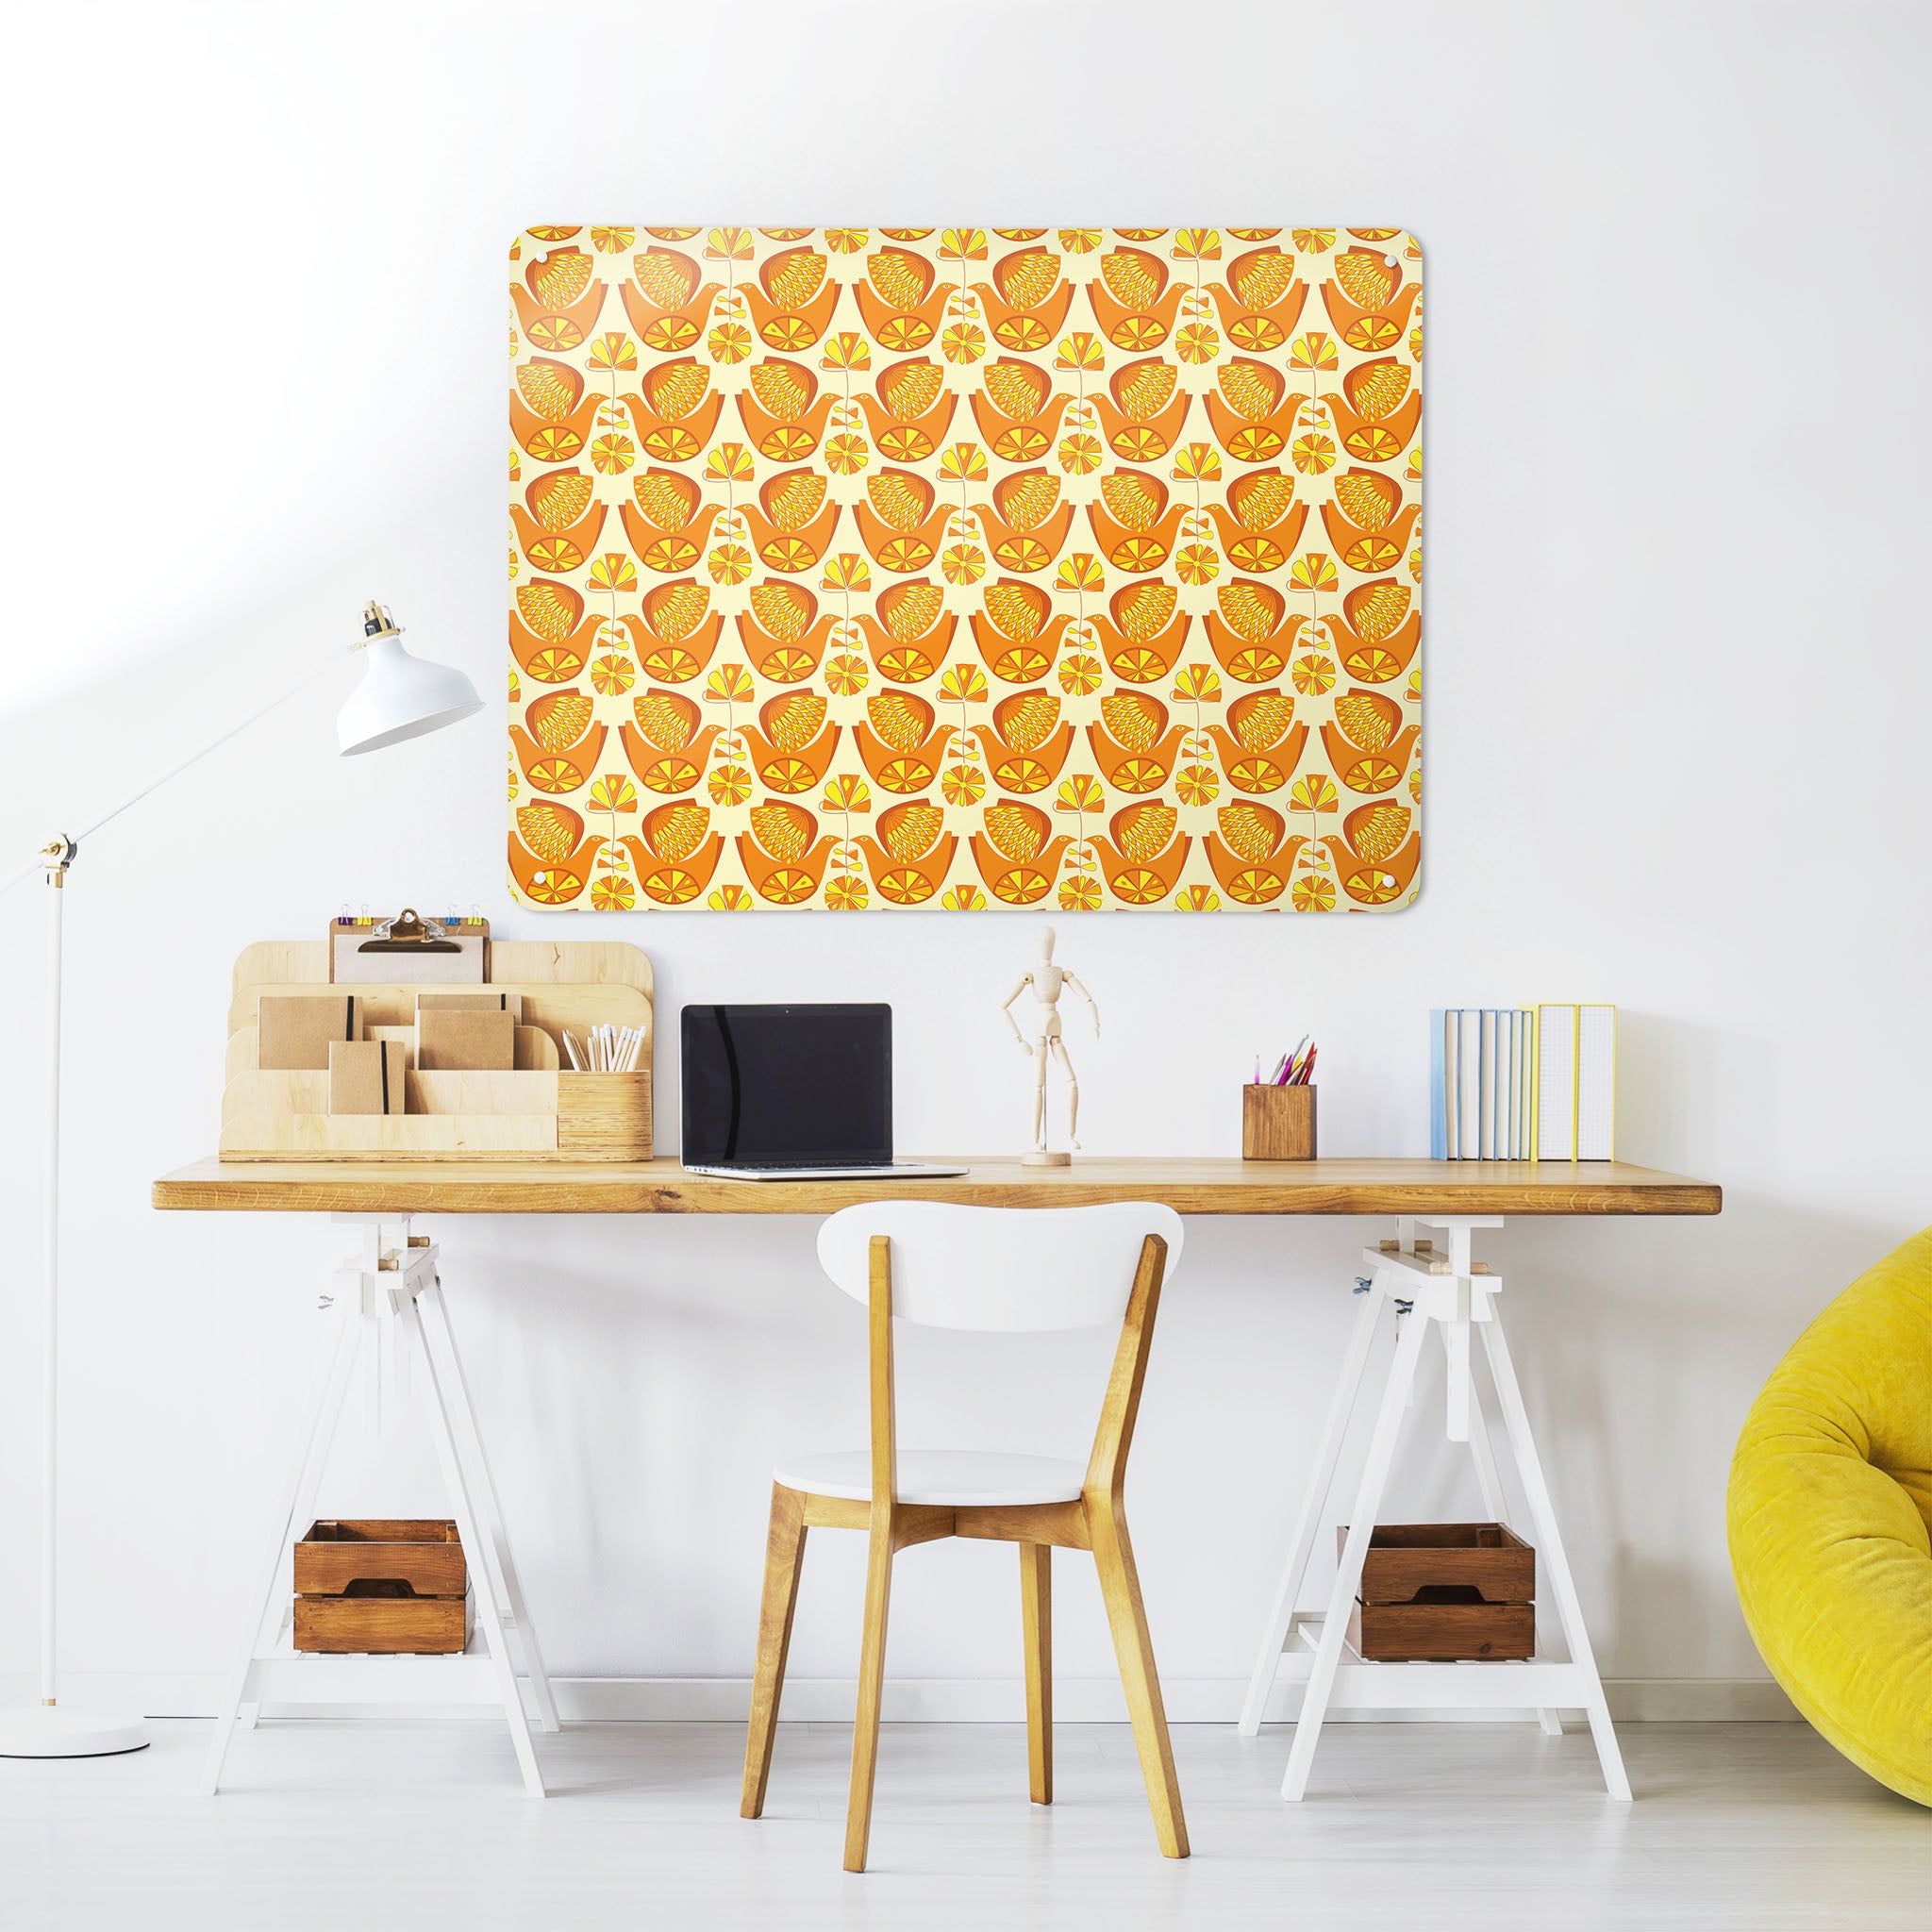 A desk in a workspace setting in a white interior with a magnetic metal wall art panel showing a retro citrus bird design in orange and lemon